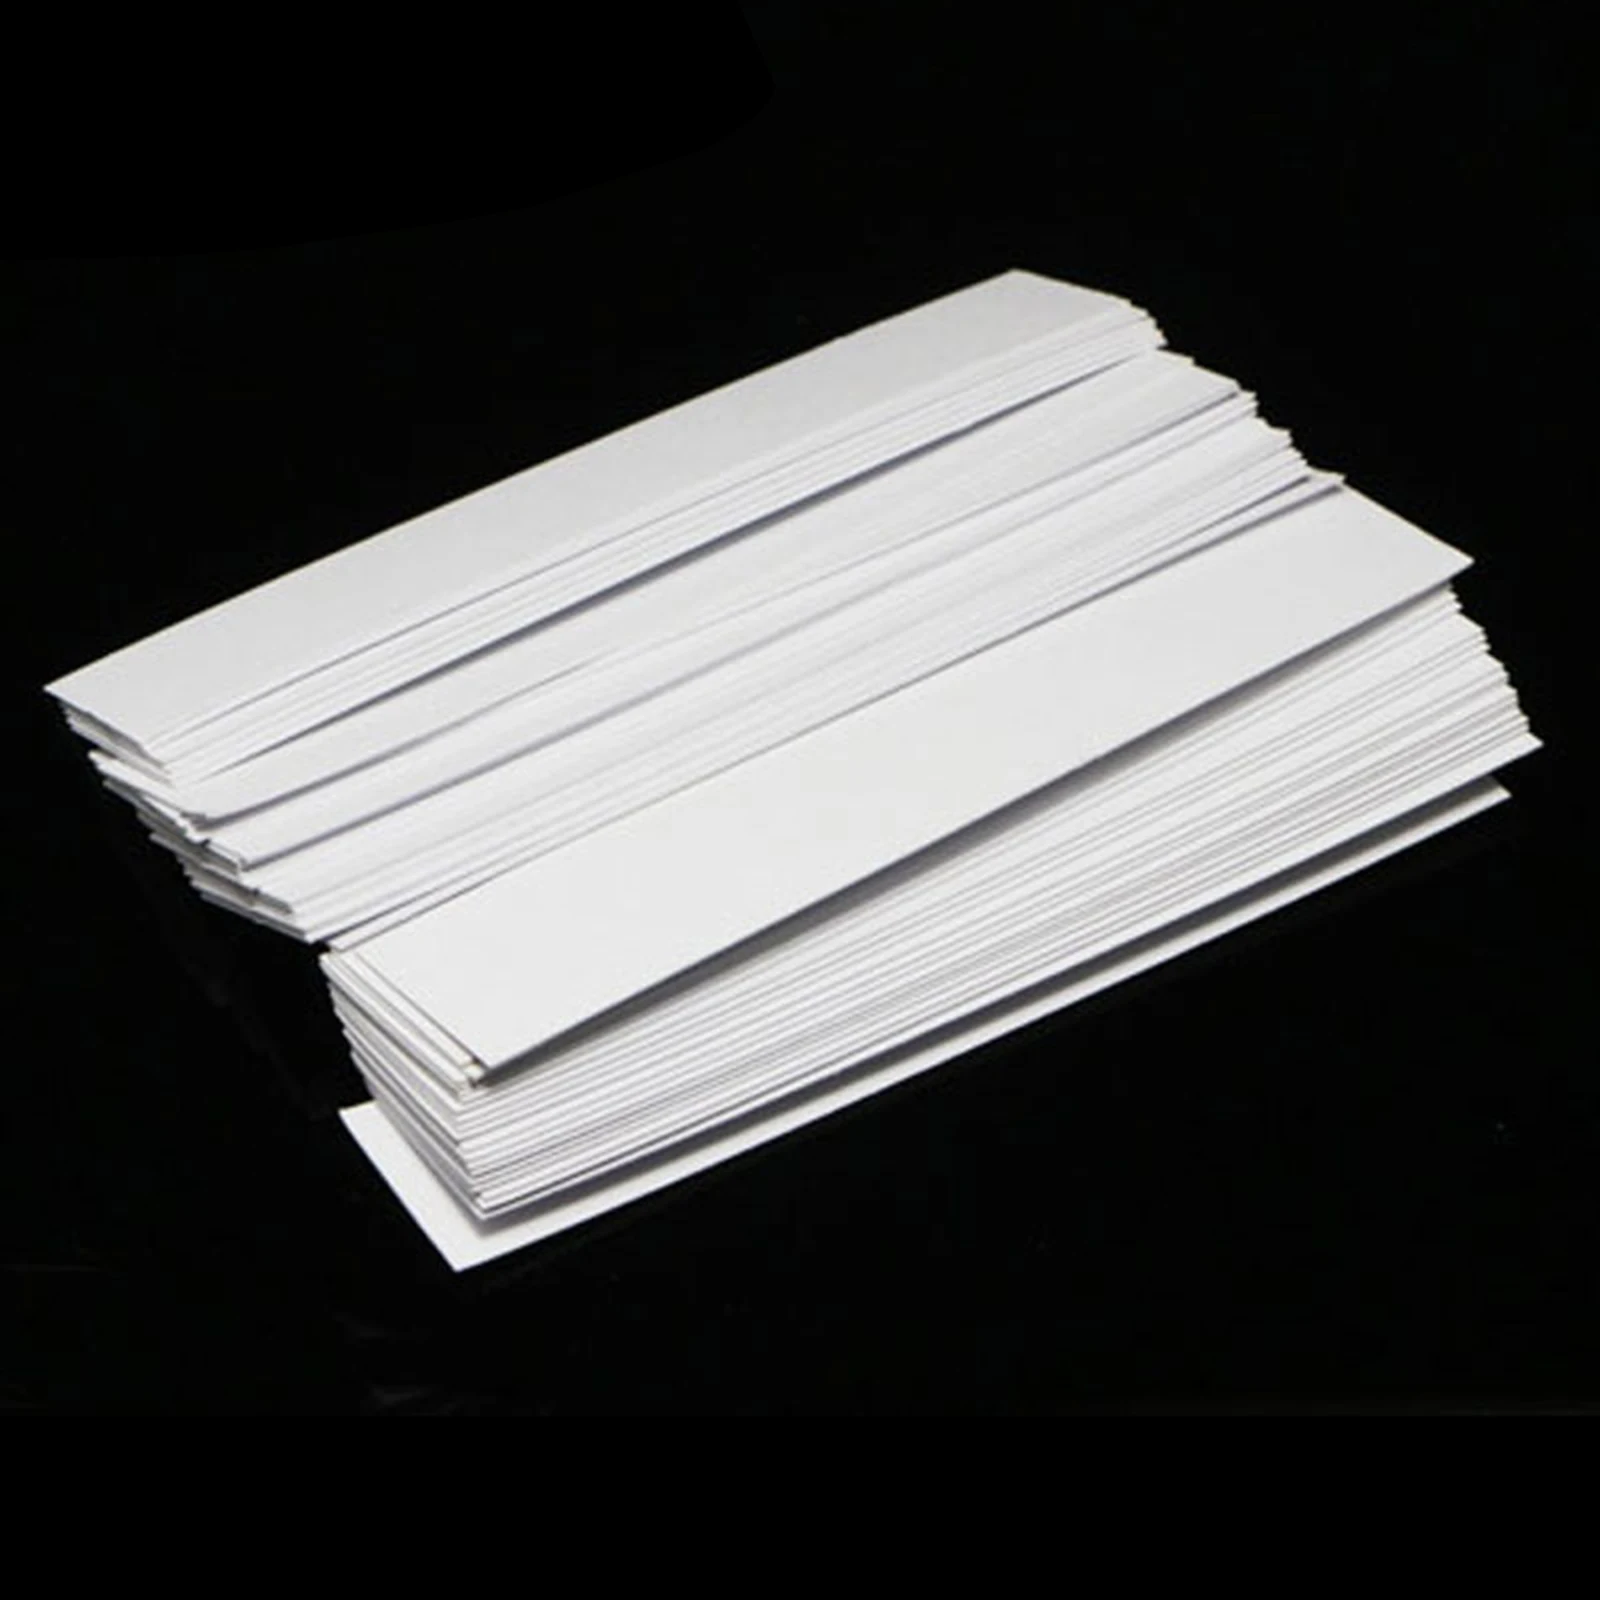 Pack of 100 White Perfume Paper Tester Strips for Aromatherapy Scent Durable